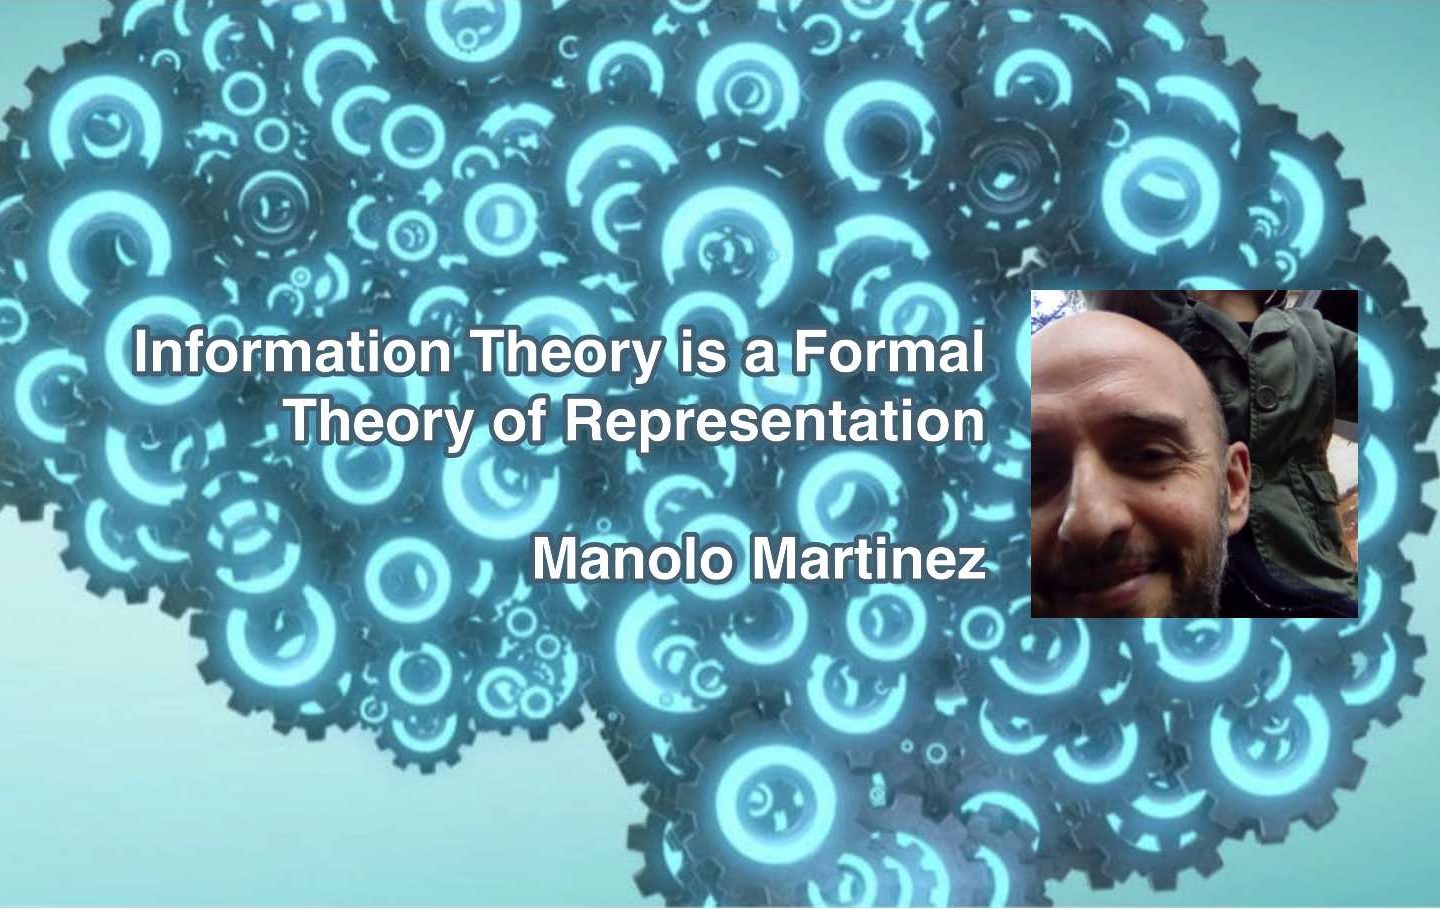 Manolo Martinez’s “Information Theory is a Formal Theory of Representation”